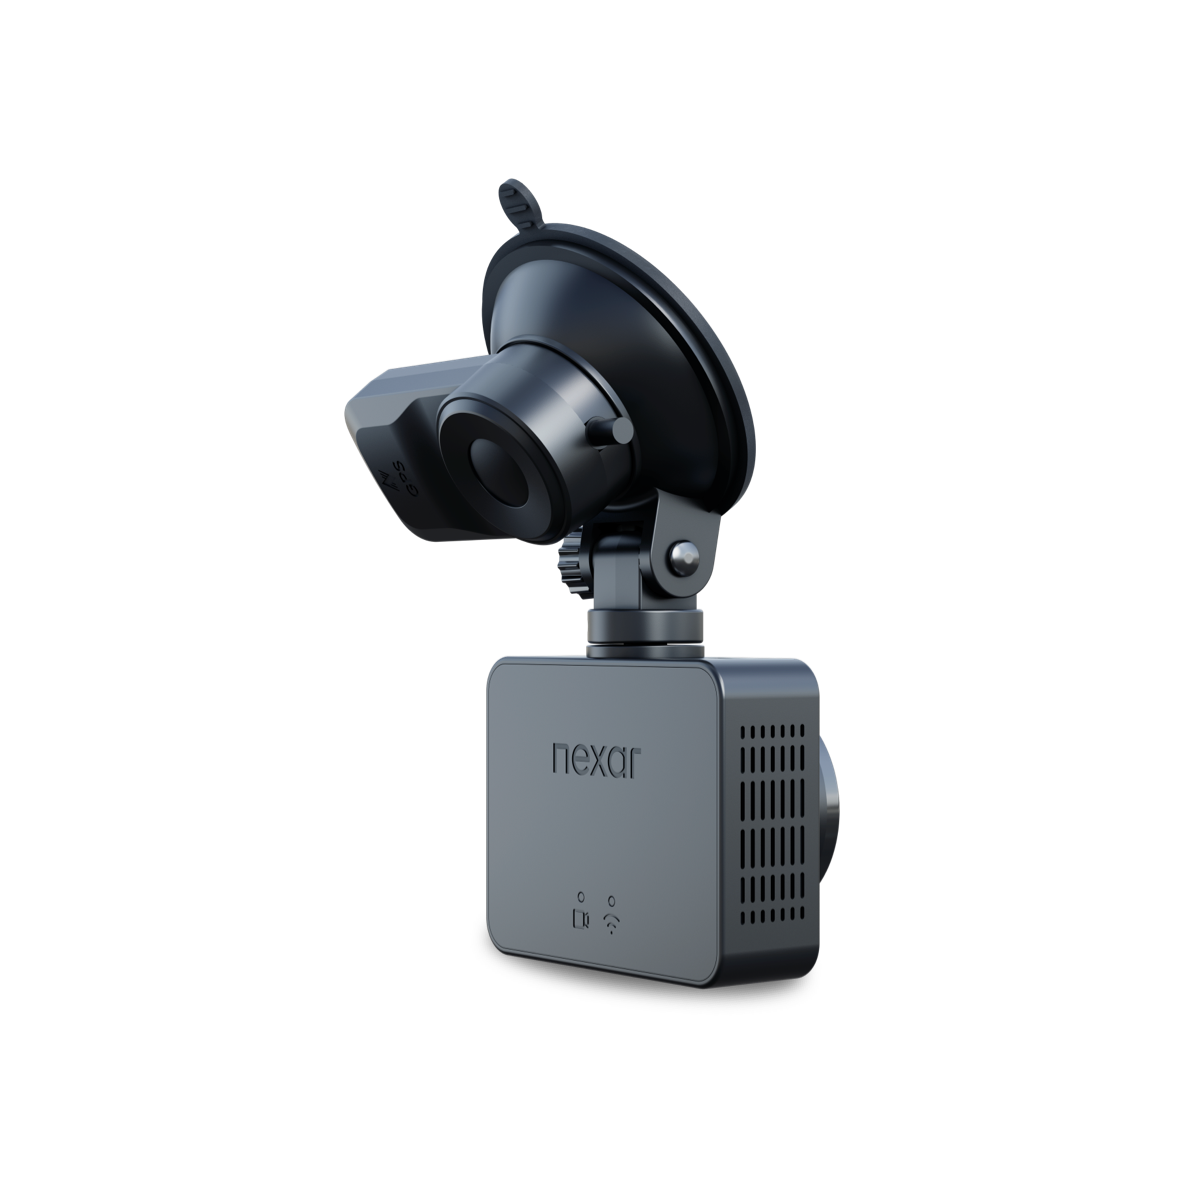 Few Dash Cams Beat the Nexar Beam in Features and Quality for the Price